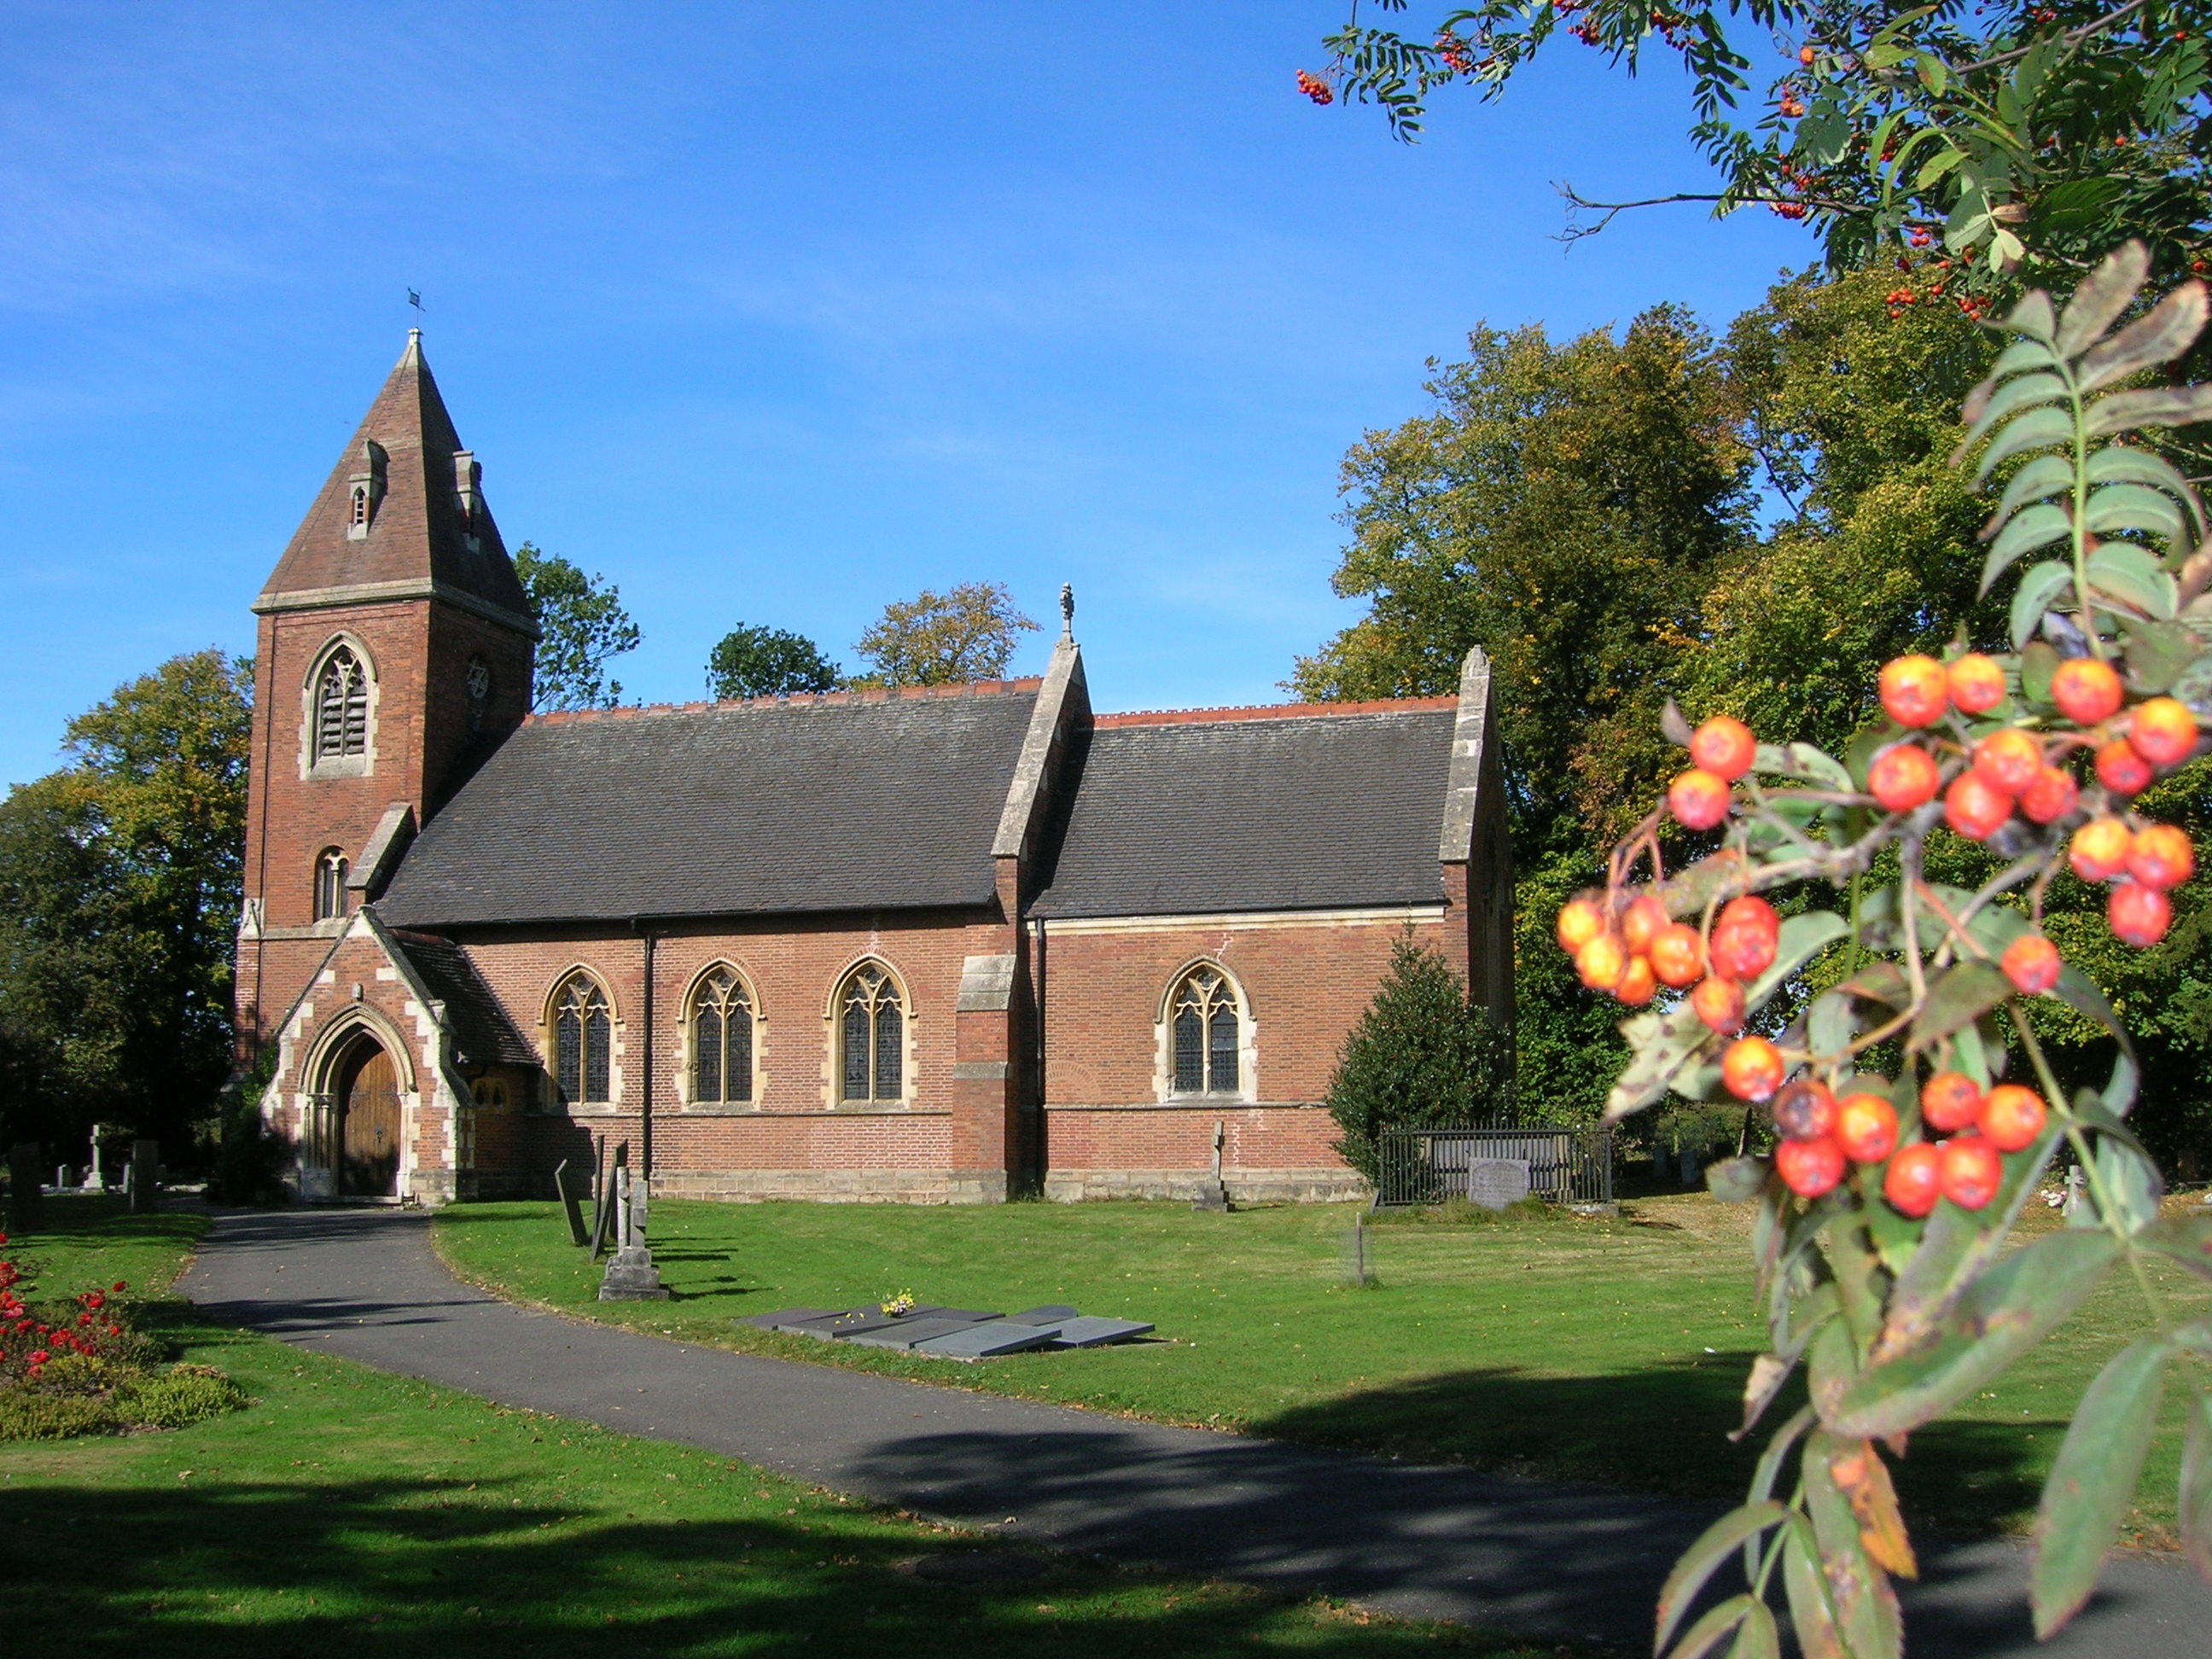 Photo of St James Church on a beautiful blue sky day